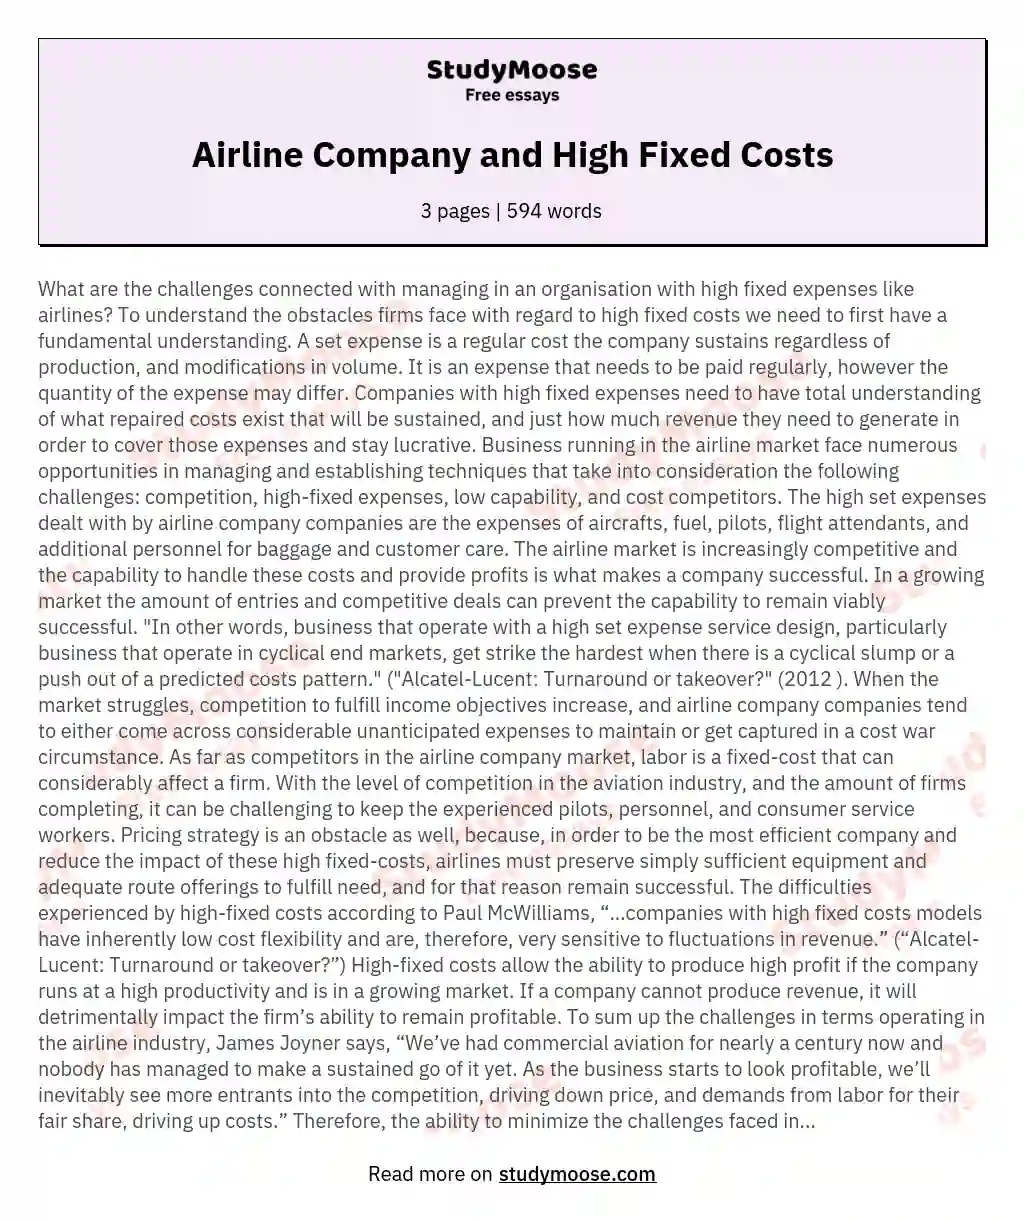 Airline Company and High Fixed Costs essay